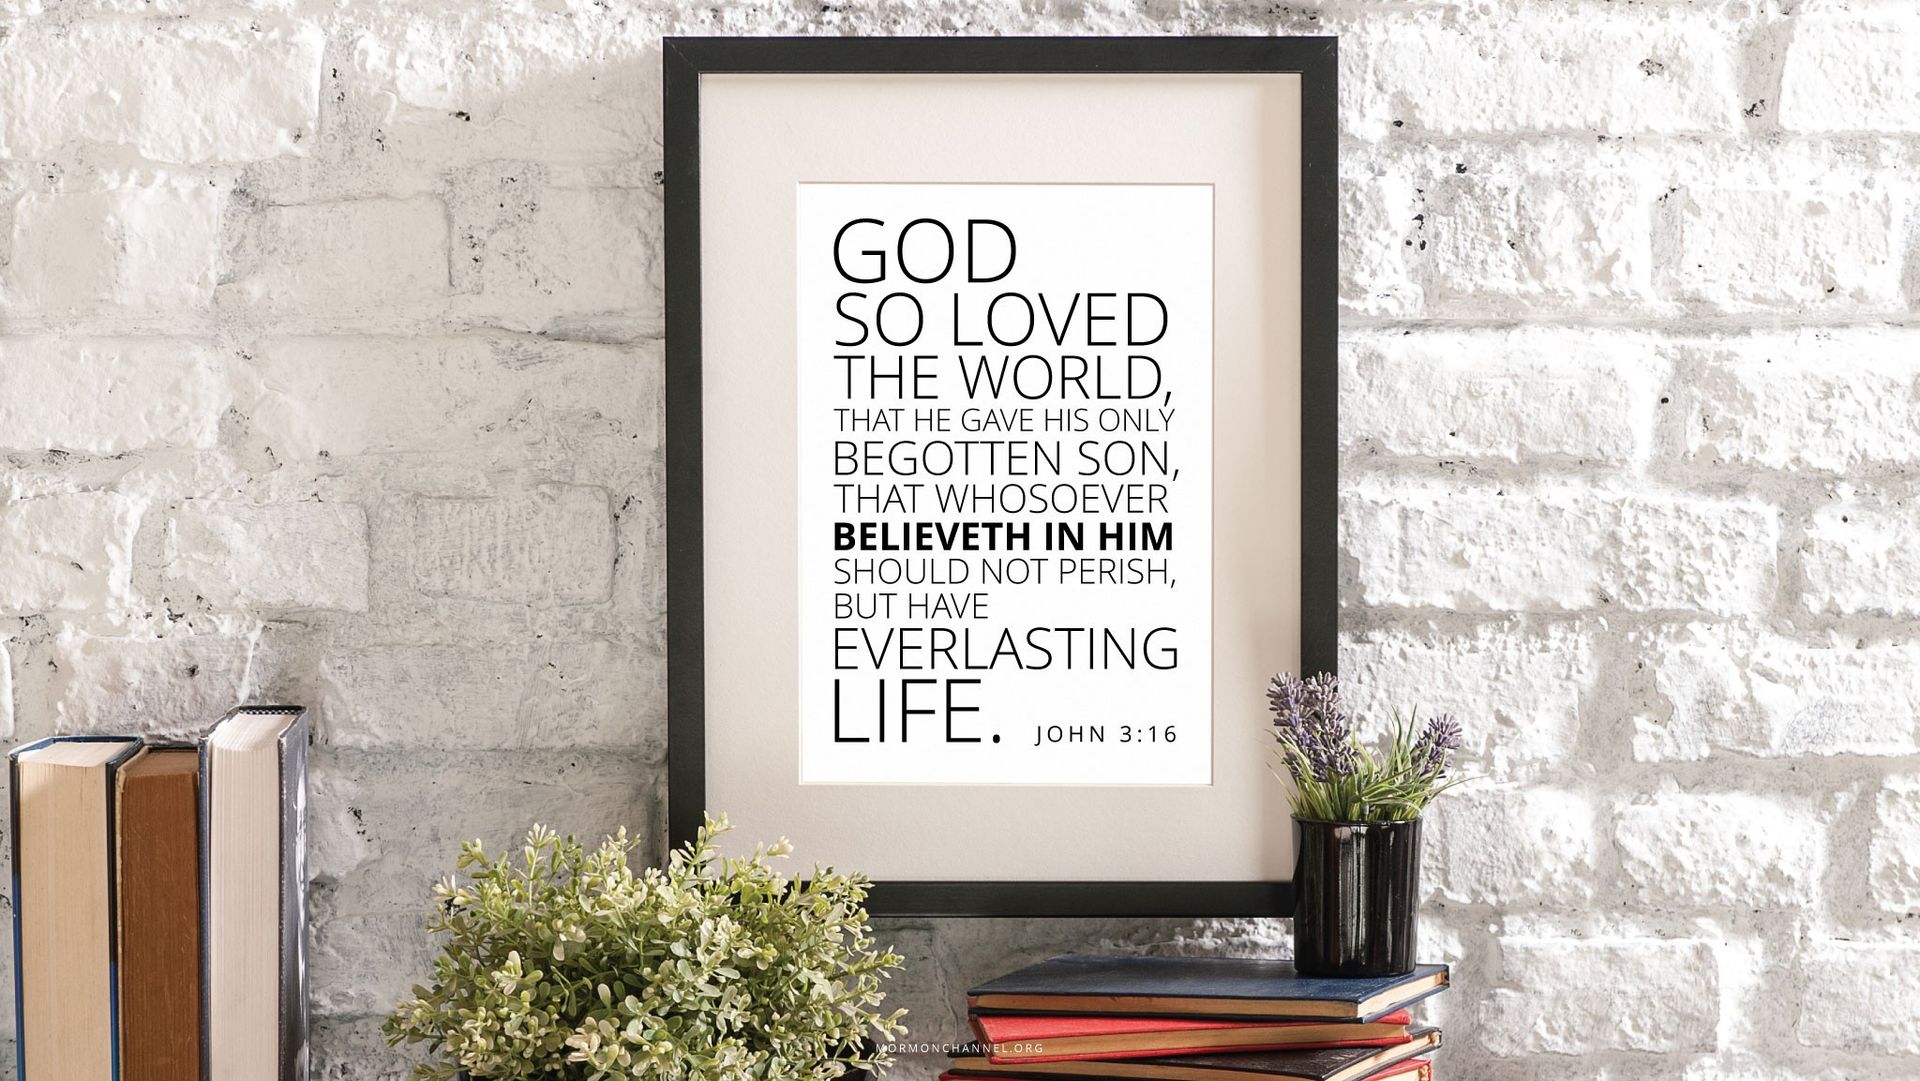 “God so loved the world, that he gave his only begotten Son, that whosoever believeth in him should not perish, but have everlasting life.”—John 3:16